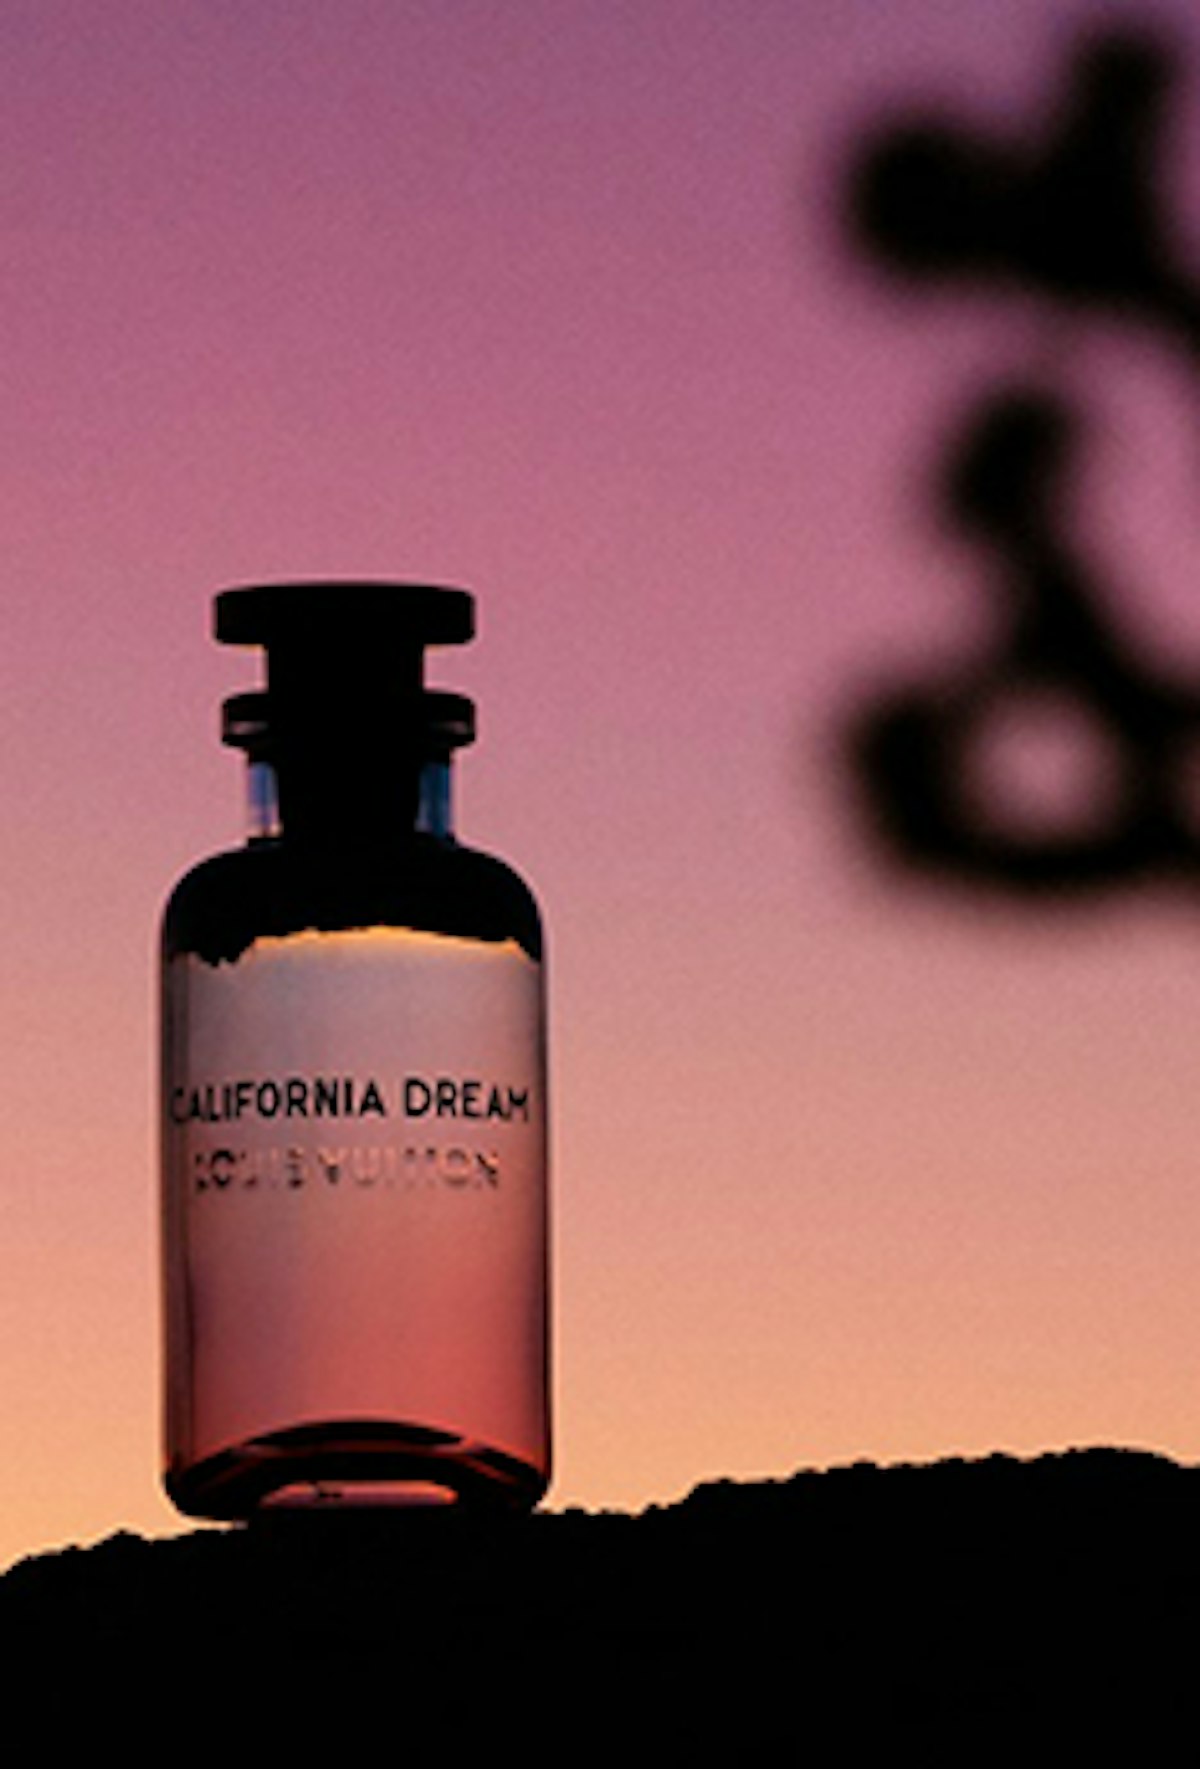 California Dream: the fragrance novelty from Louis Vuitton